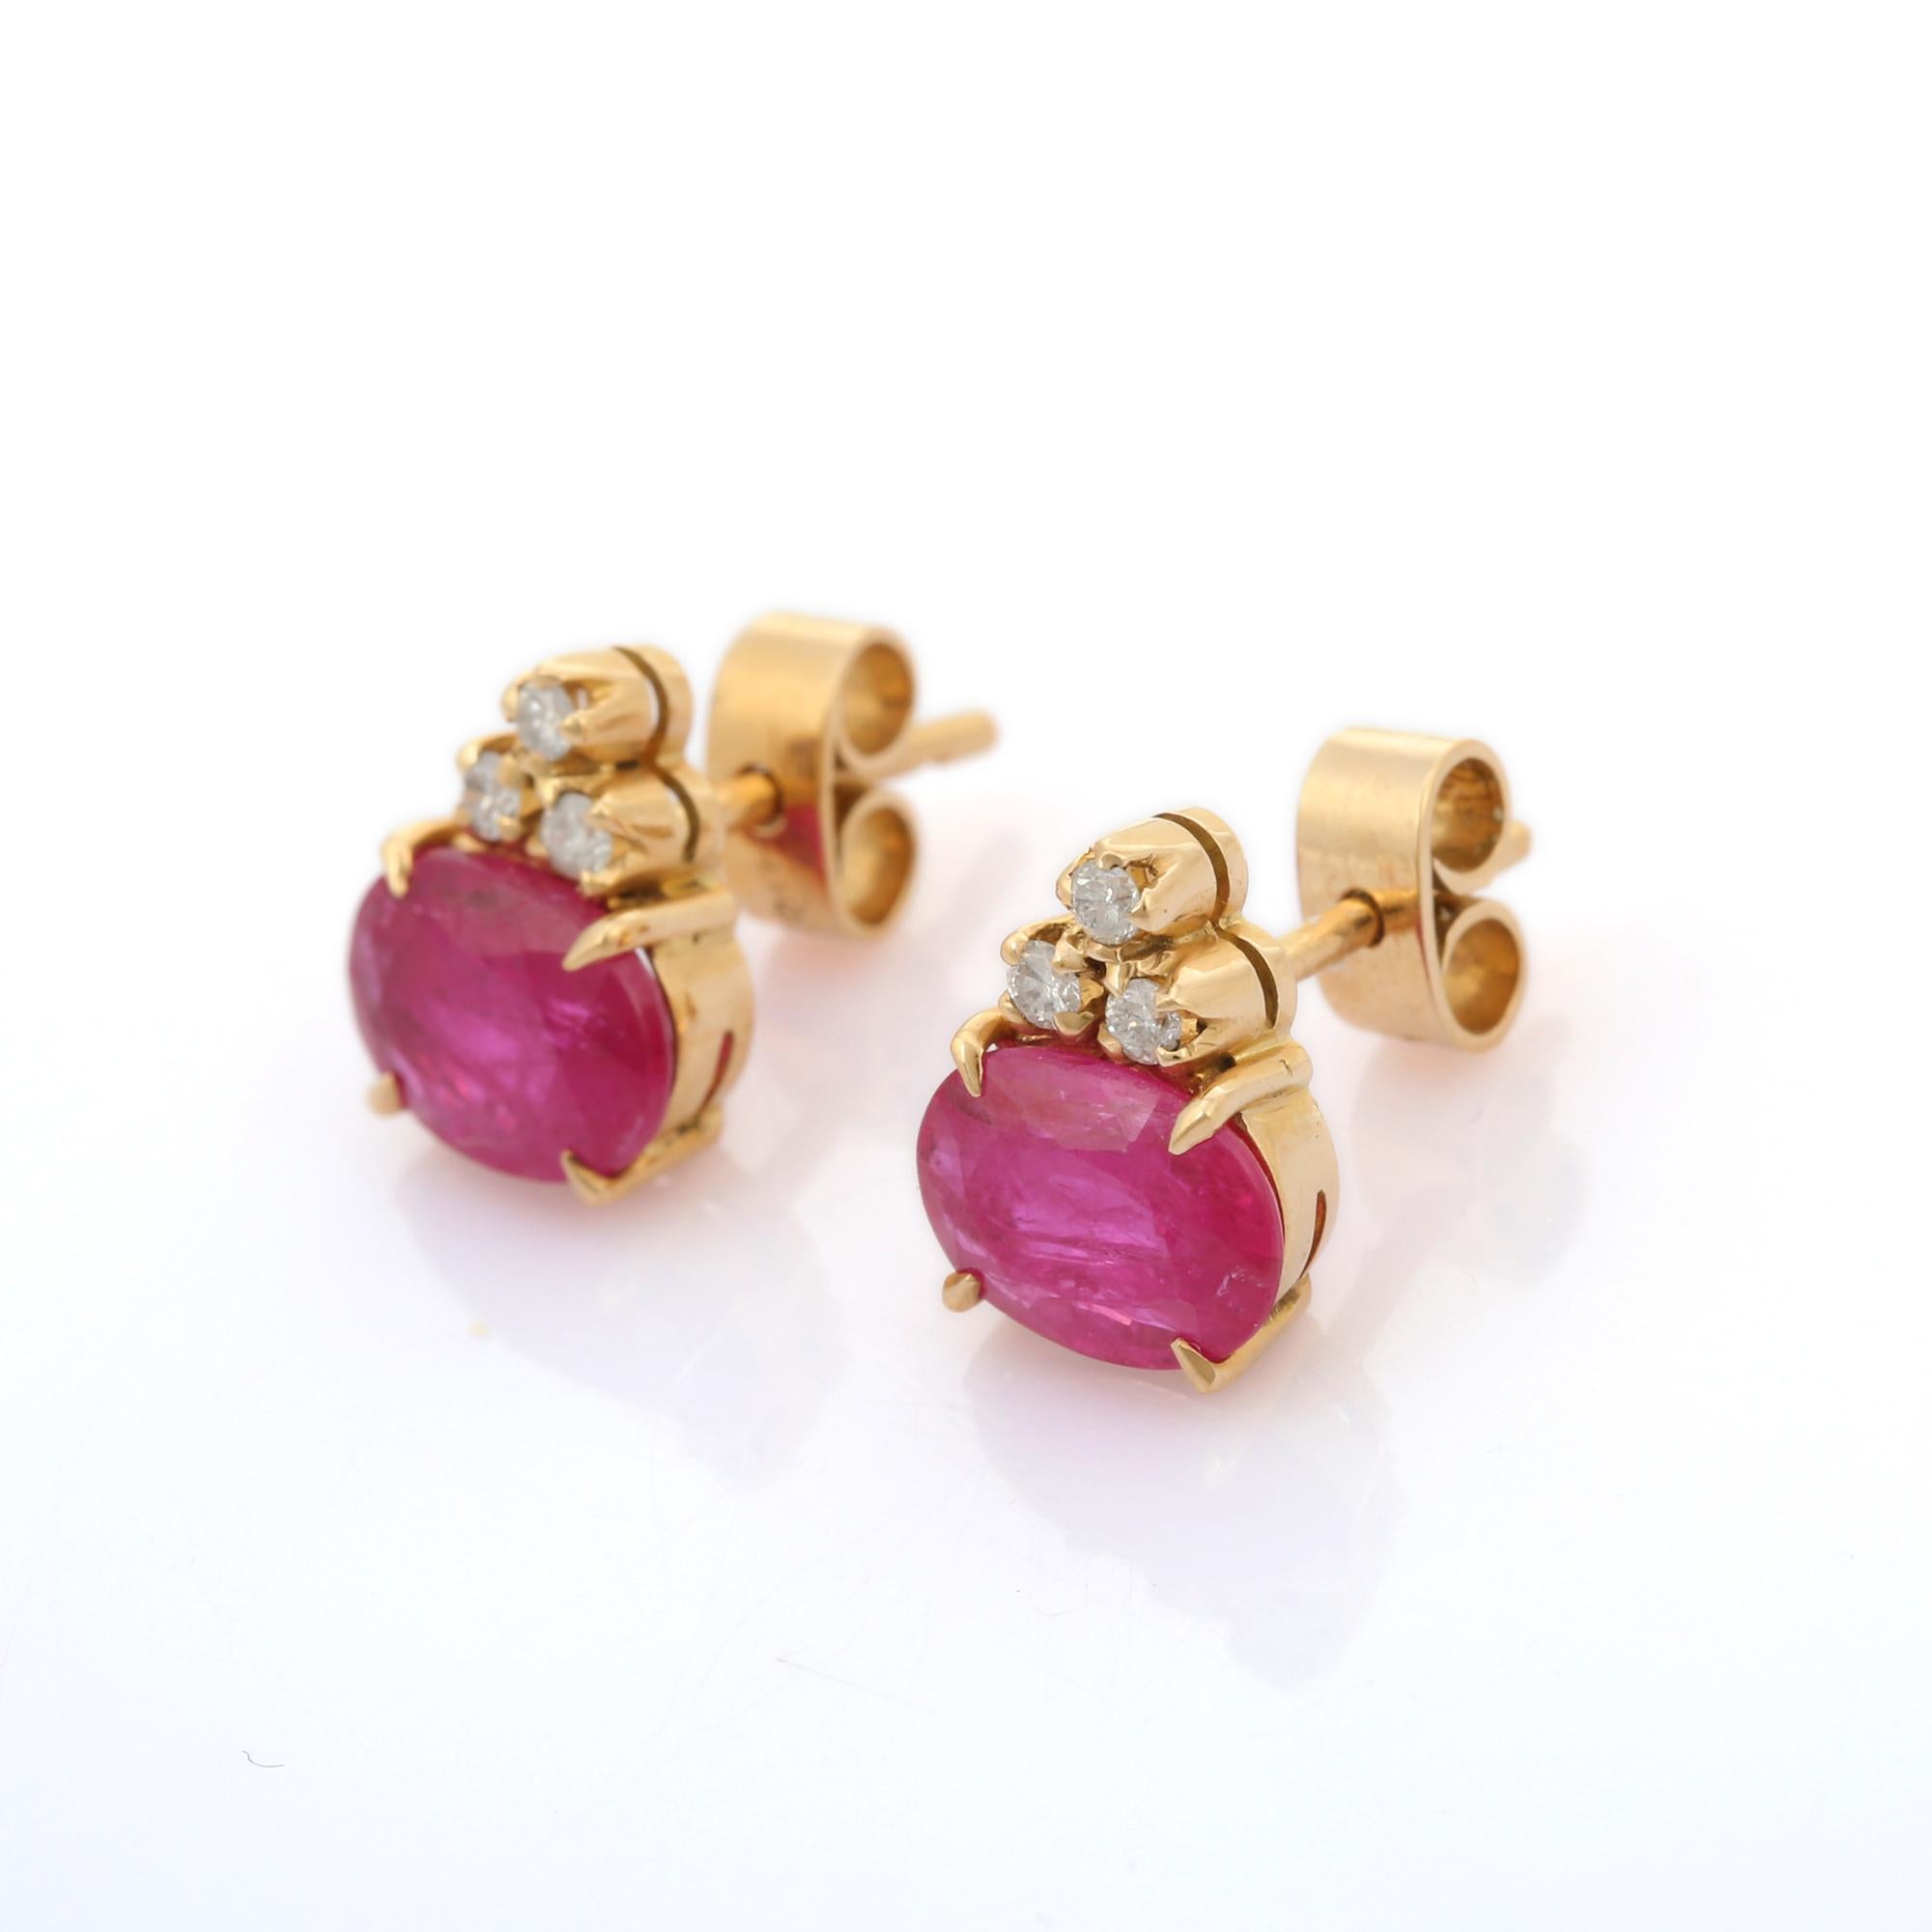 Studs create a subtle beauty while showcasing the colors of the natural precious gemstones and illuminating diamonds making a statement.
Ruby with diamonds stud earrings in 18K gold. Embrace your look with these stunning pair of earrings suitable